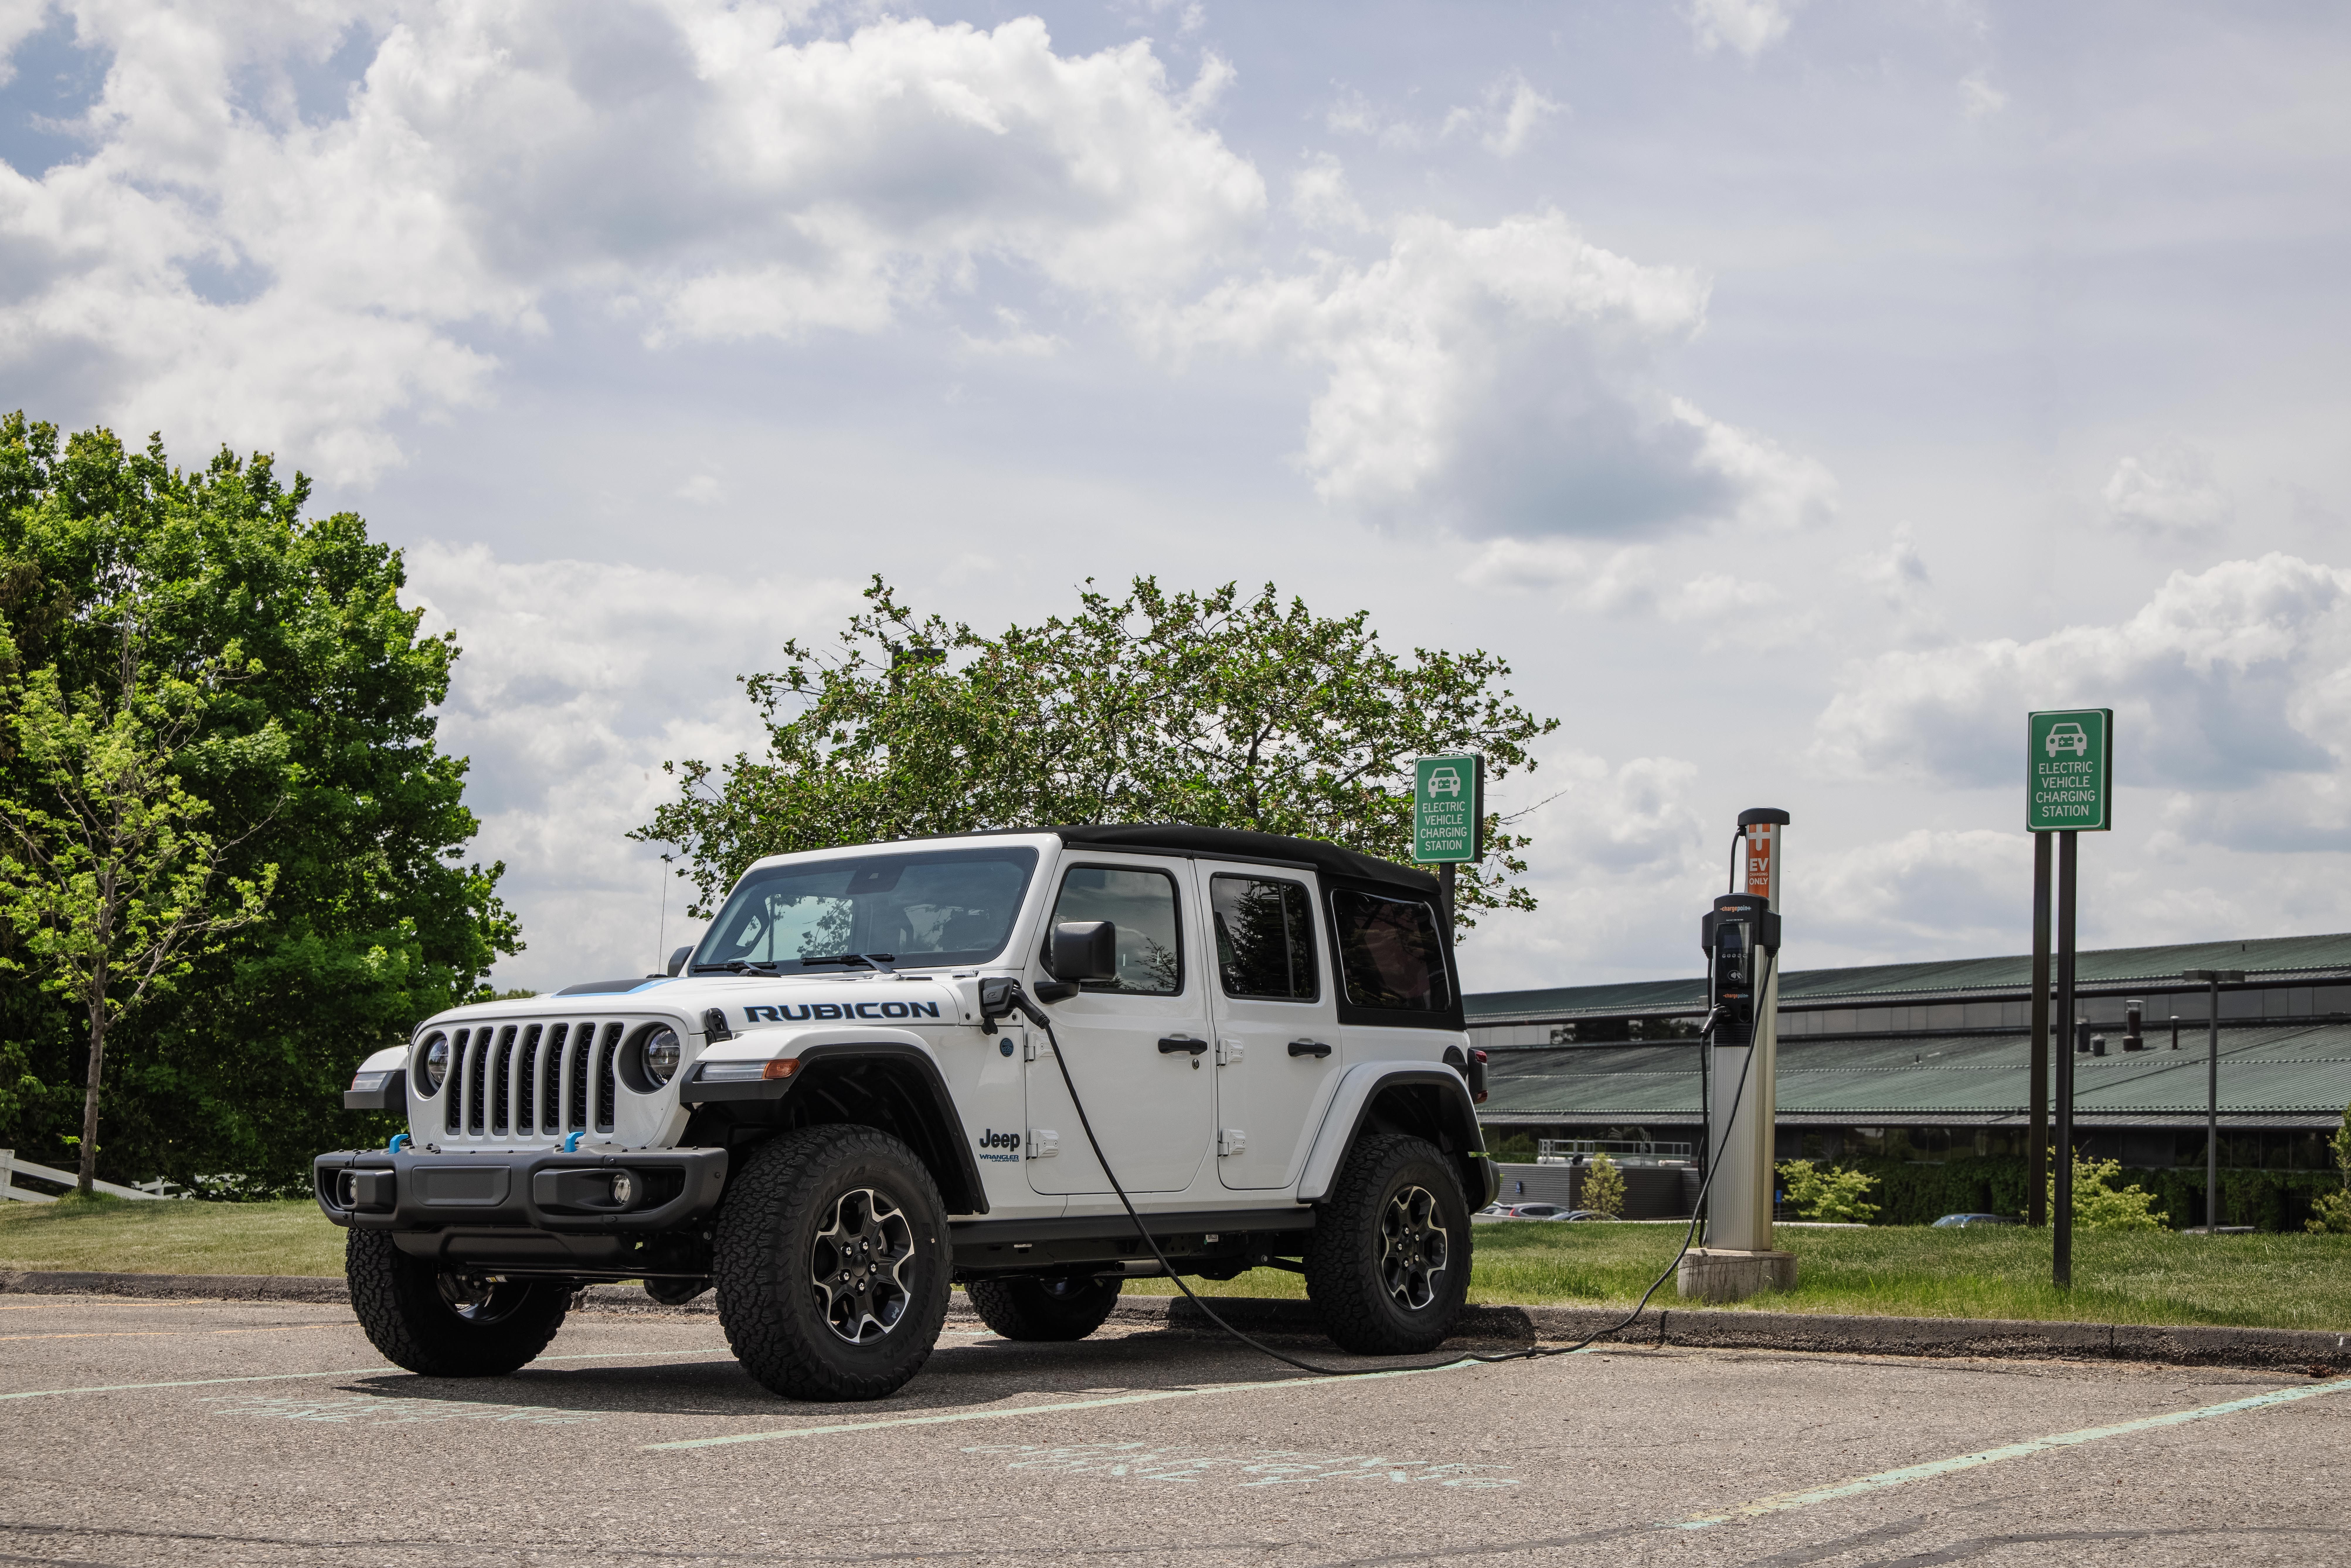 Tested: 2021 Jeep Wrangler 4xe Complicates a Simple Machine